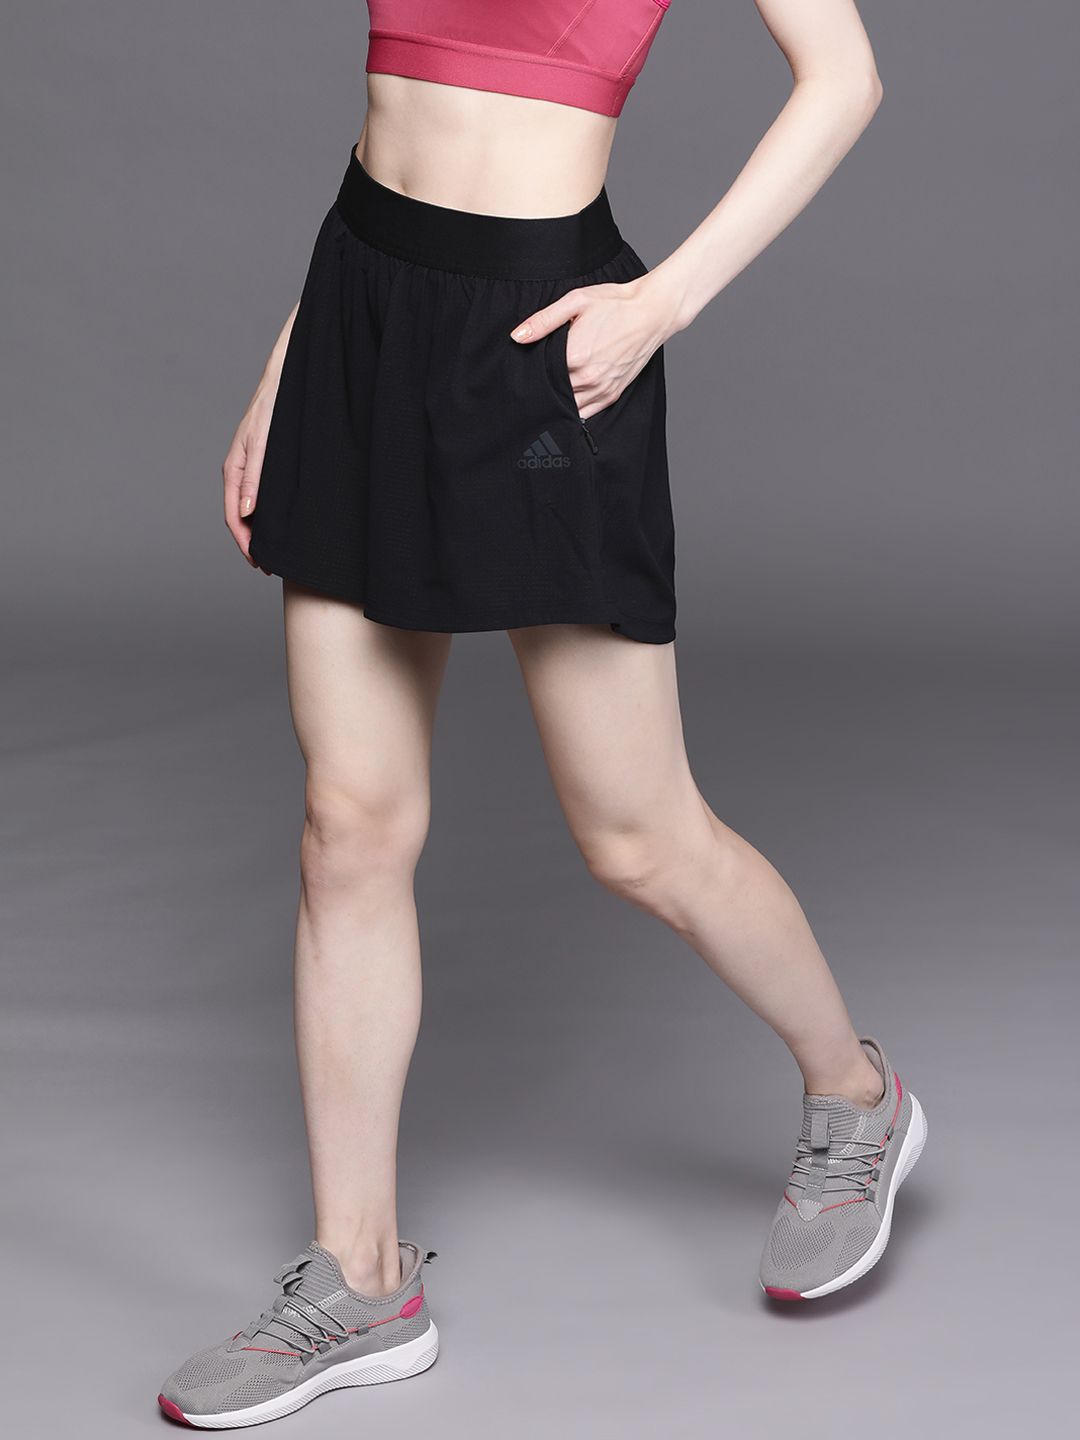 ADIDAS Women Black HEAT.RDY WARRIOR Woven Shorts Price in India